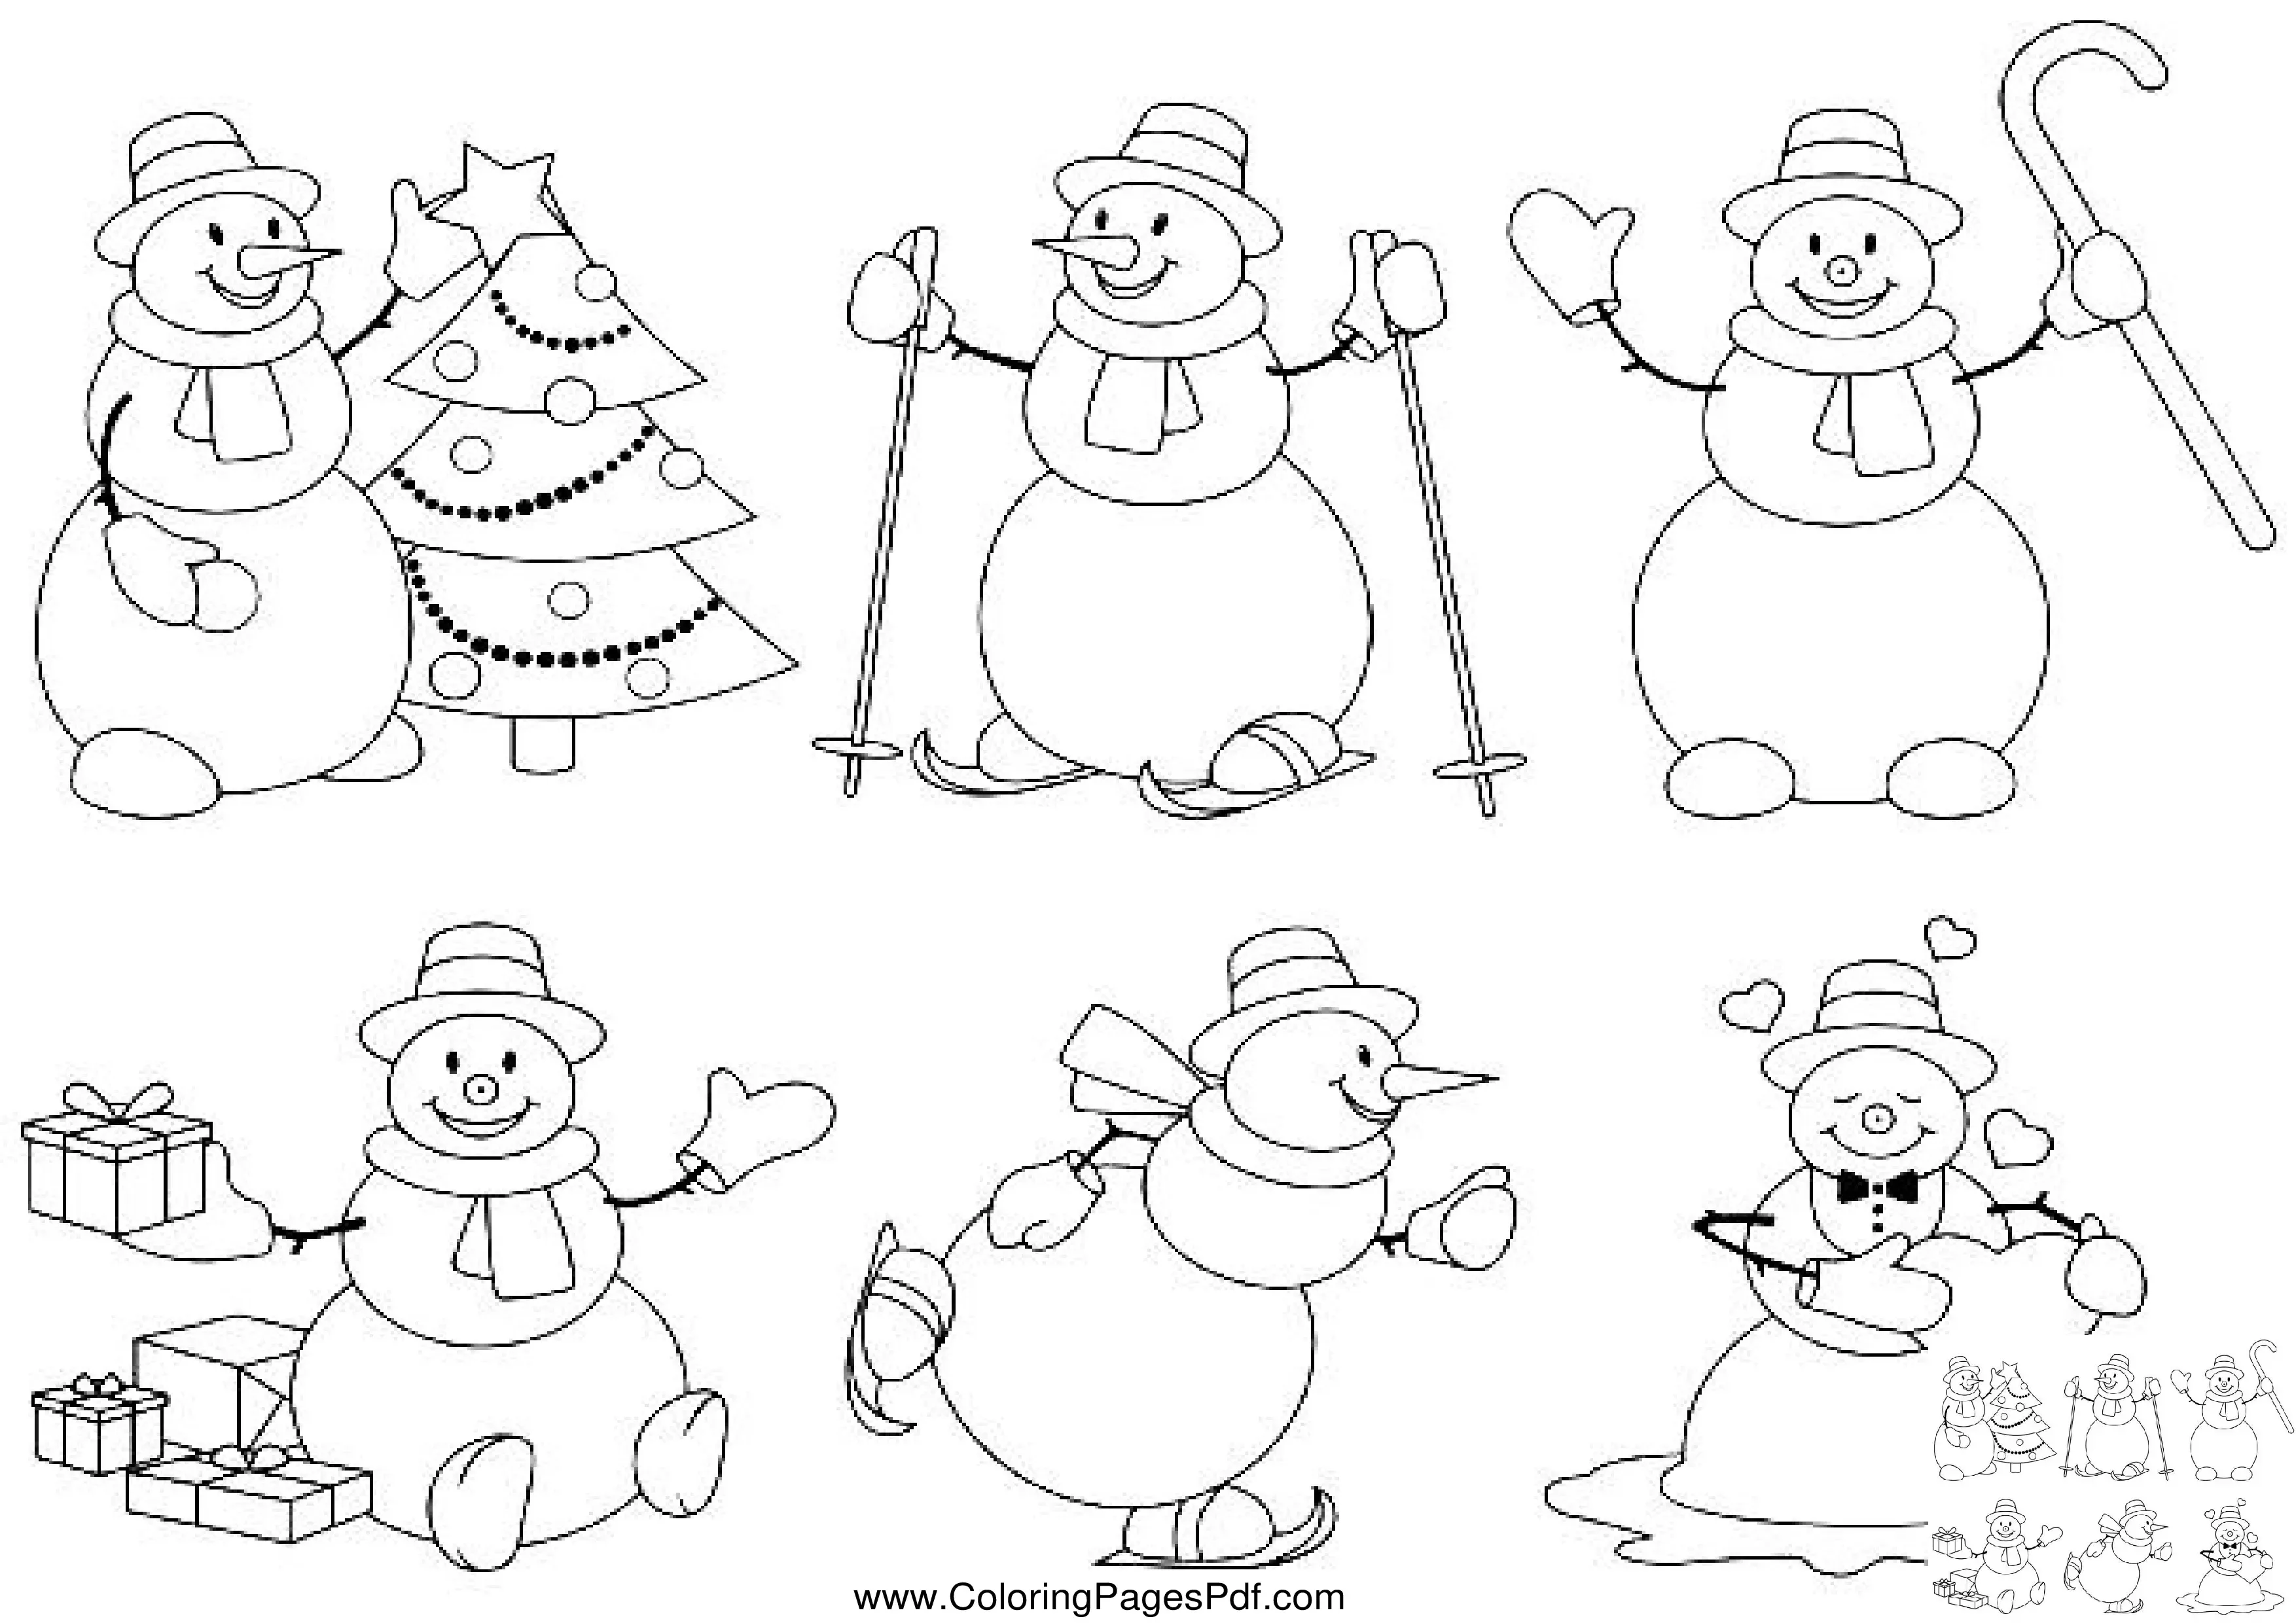 Snowman coloring pages printable